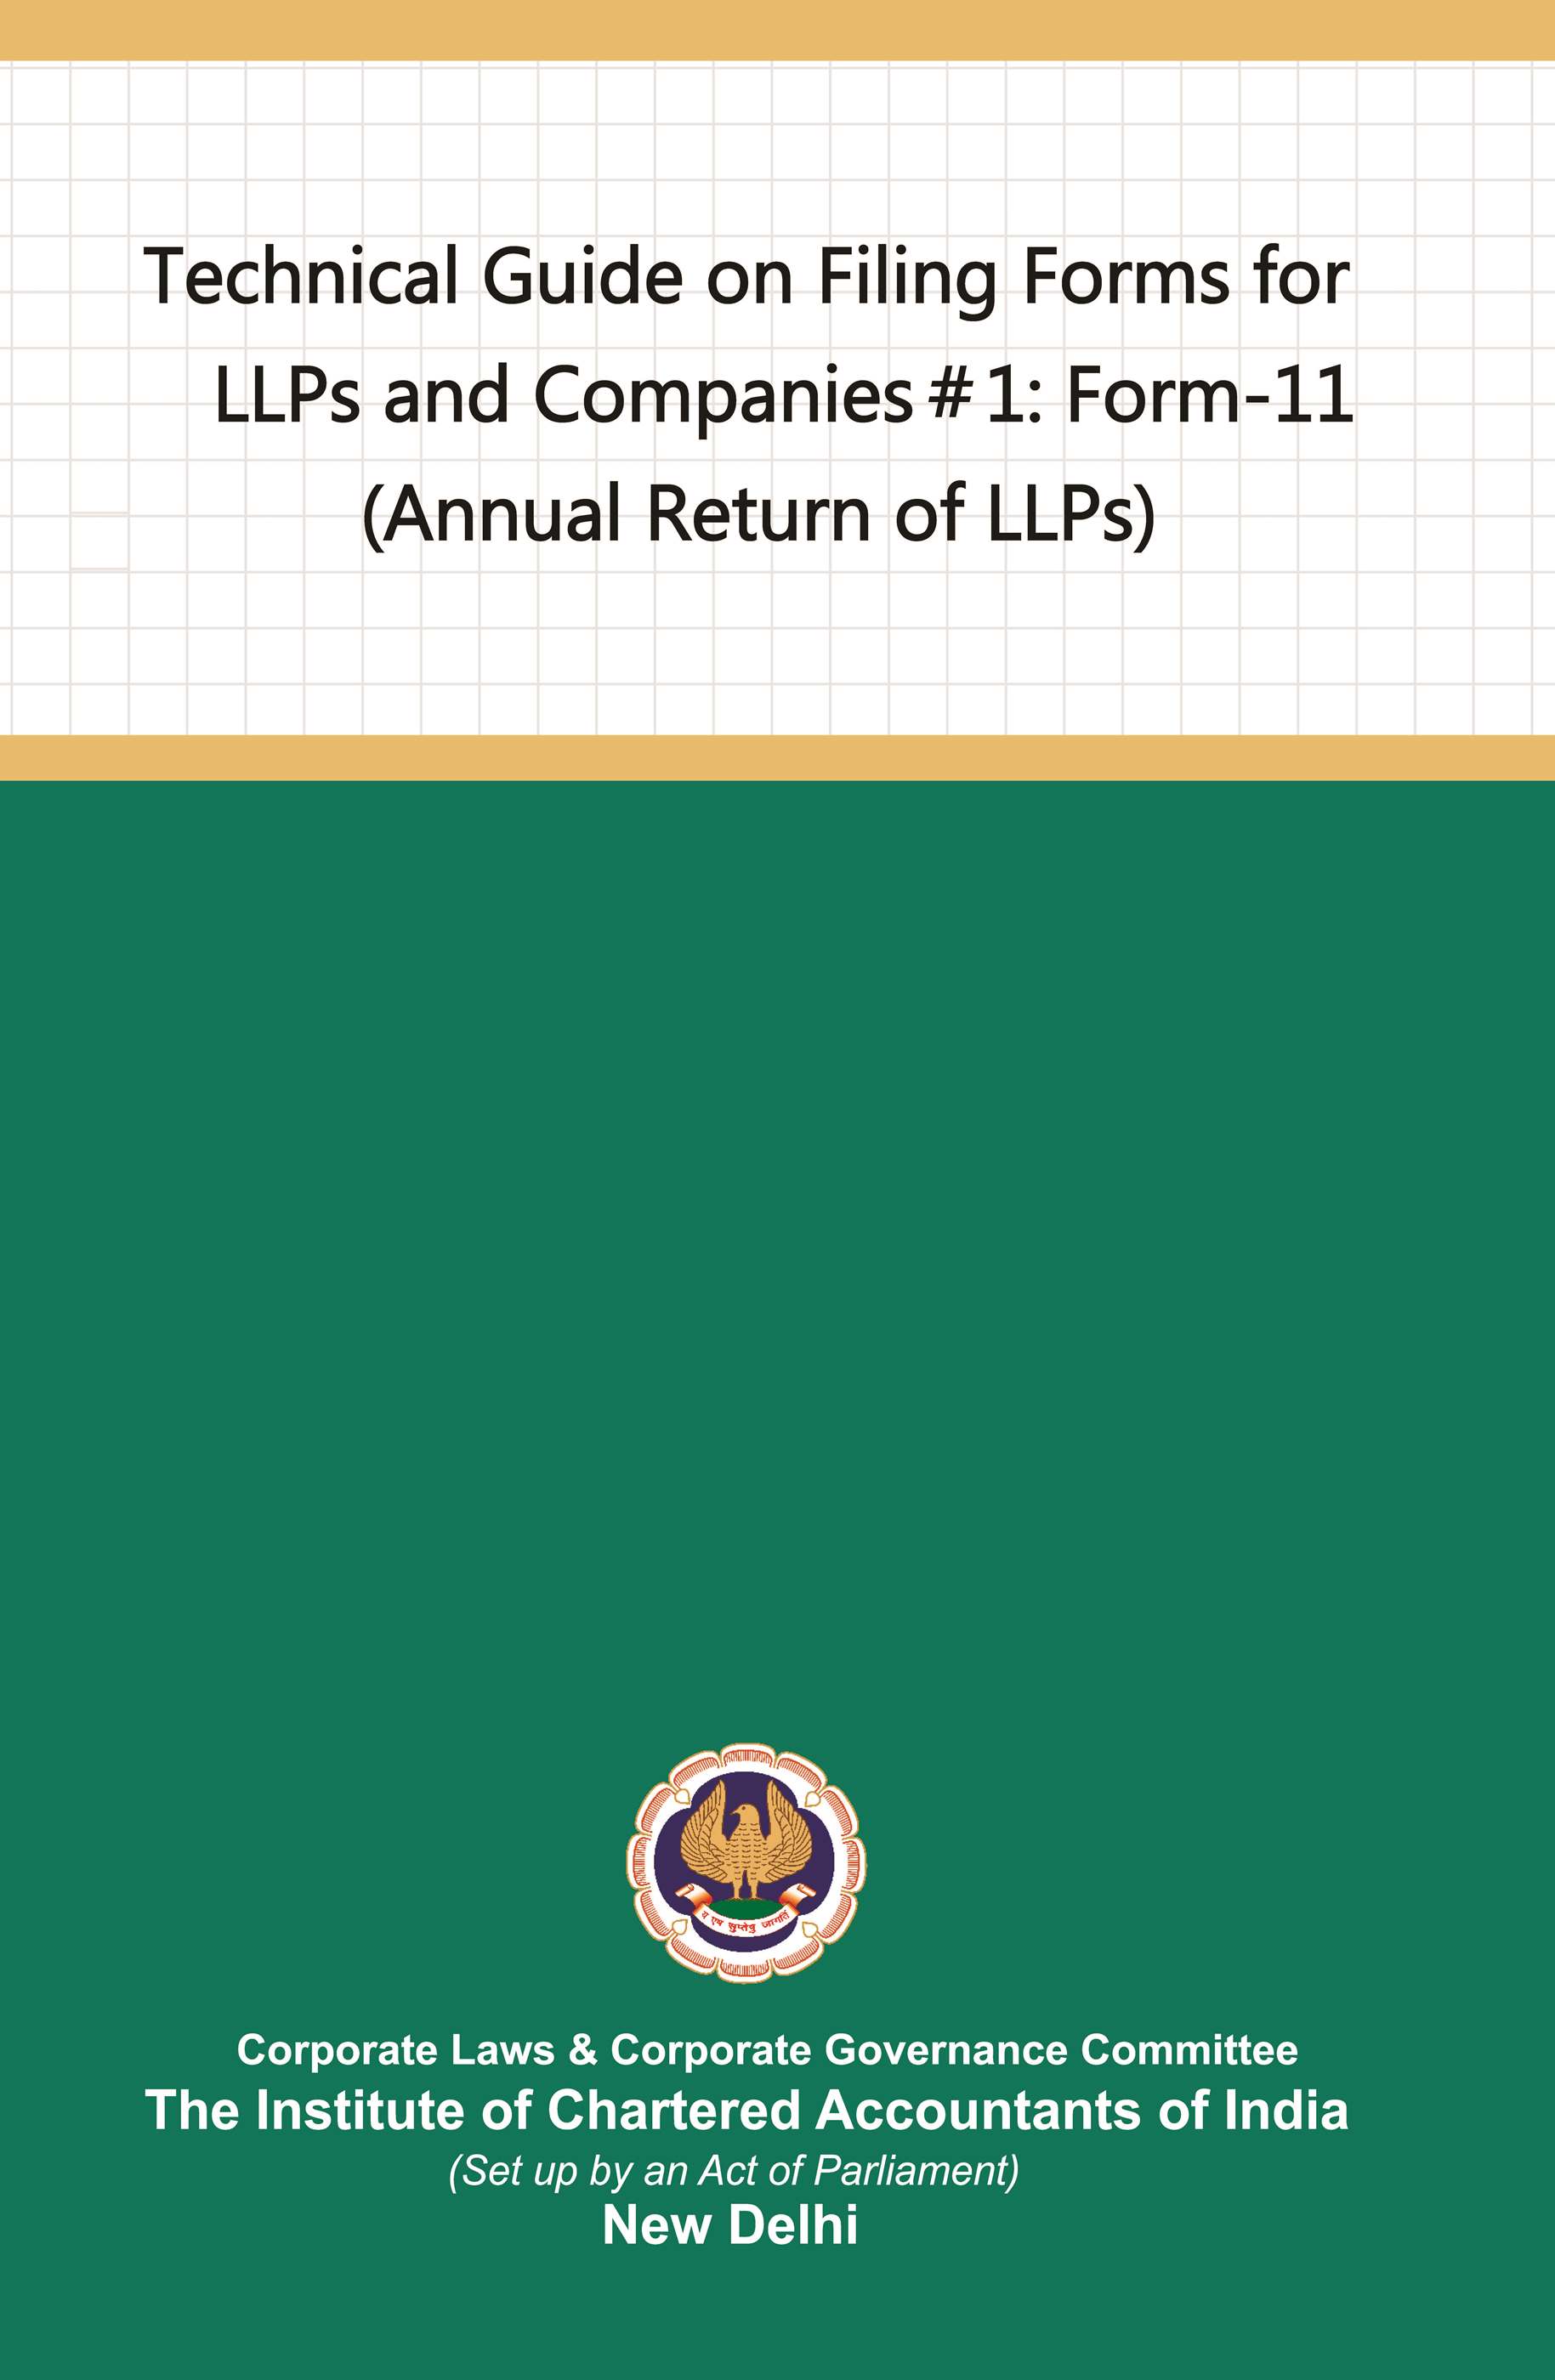 Technical Guide on Filing Forms for LLPs and Companies 1 Form-11 (Annual Return of LLPs) (July, 2022)